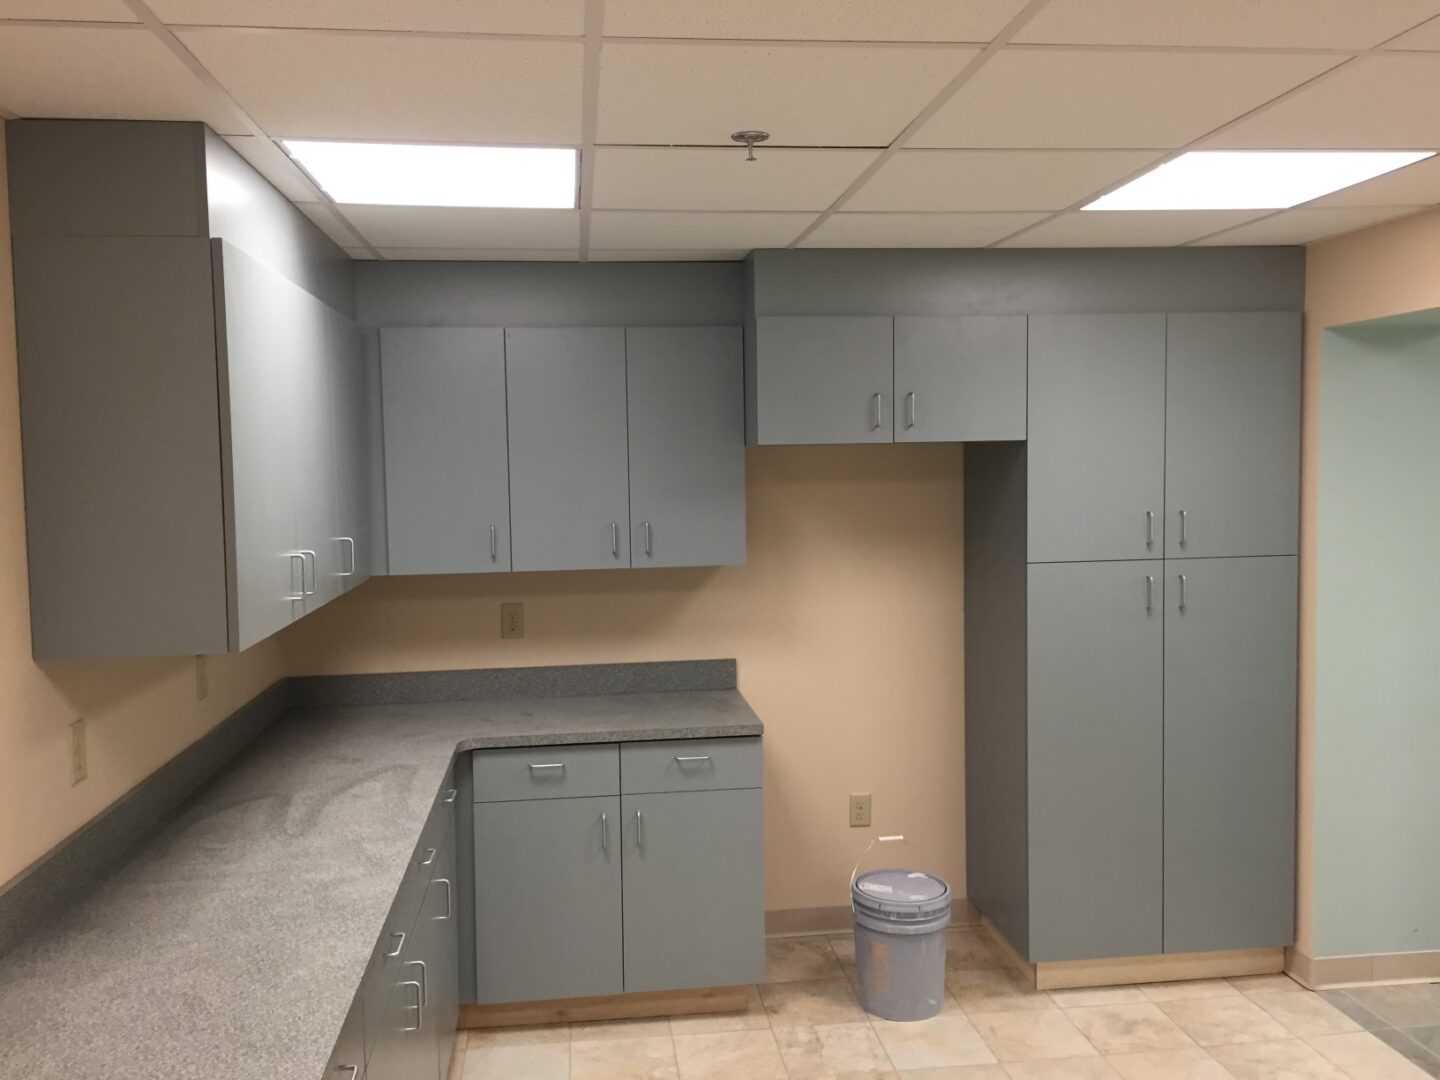 Close view of the gray kitchen cabinets